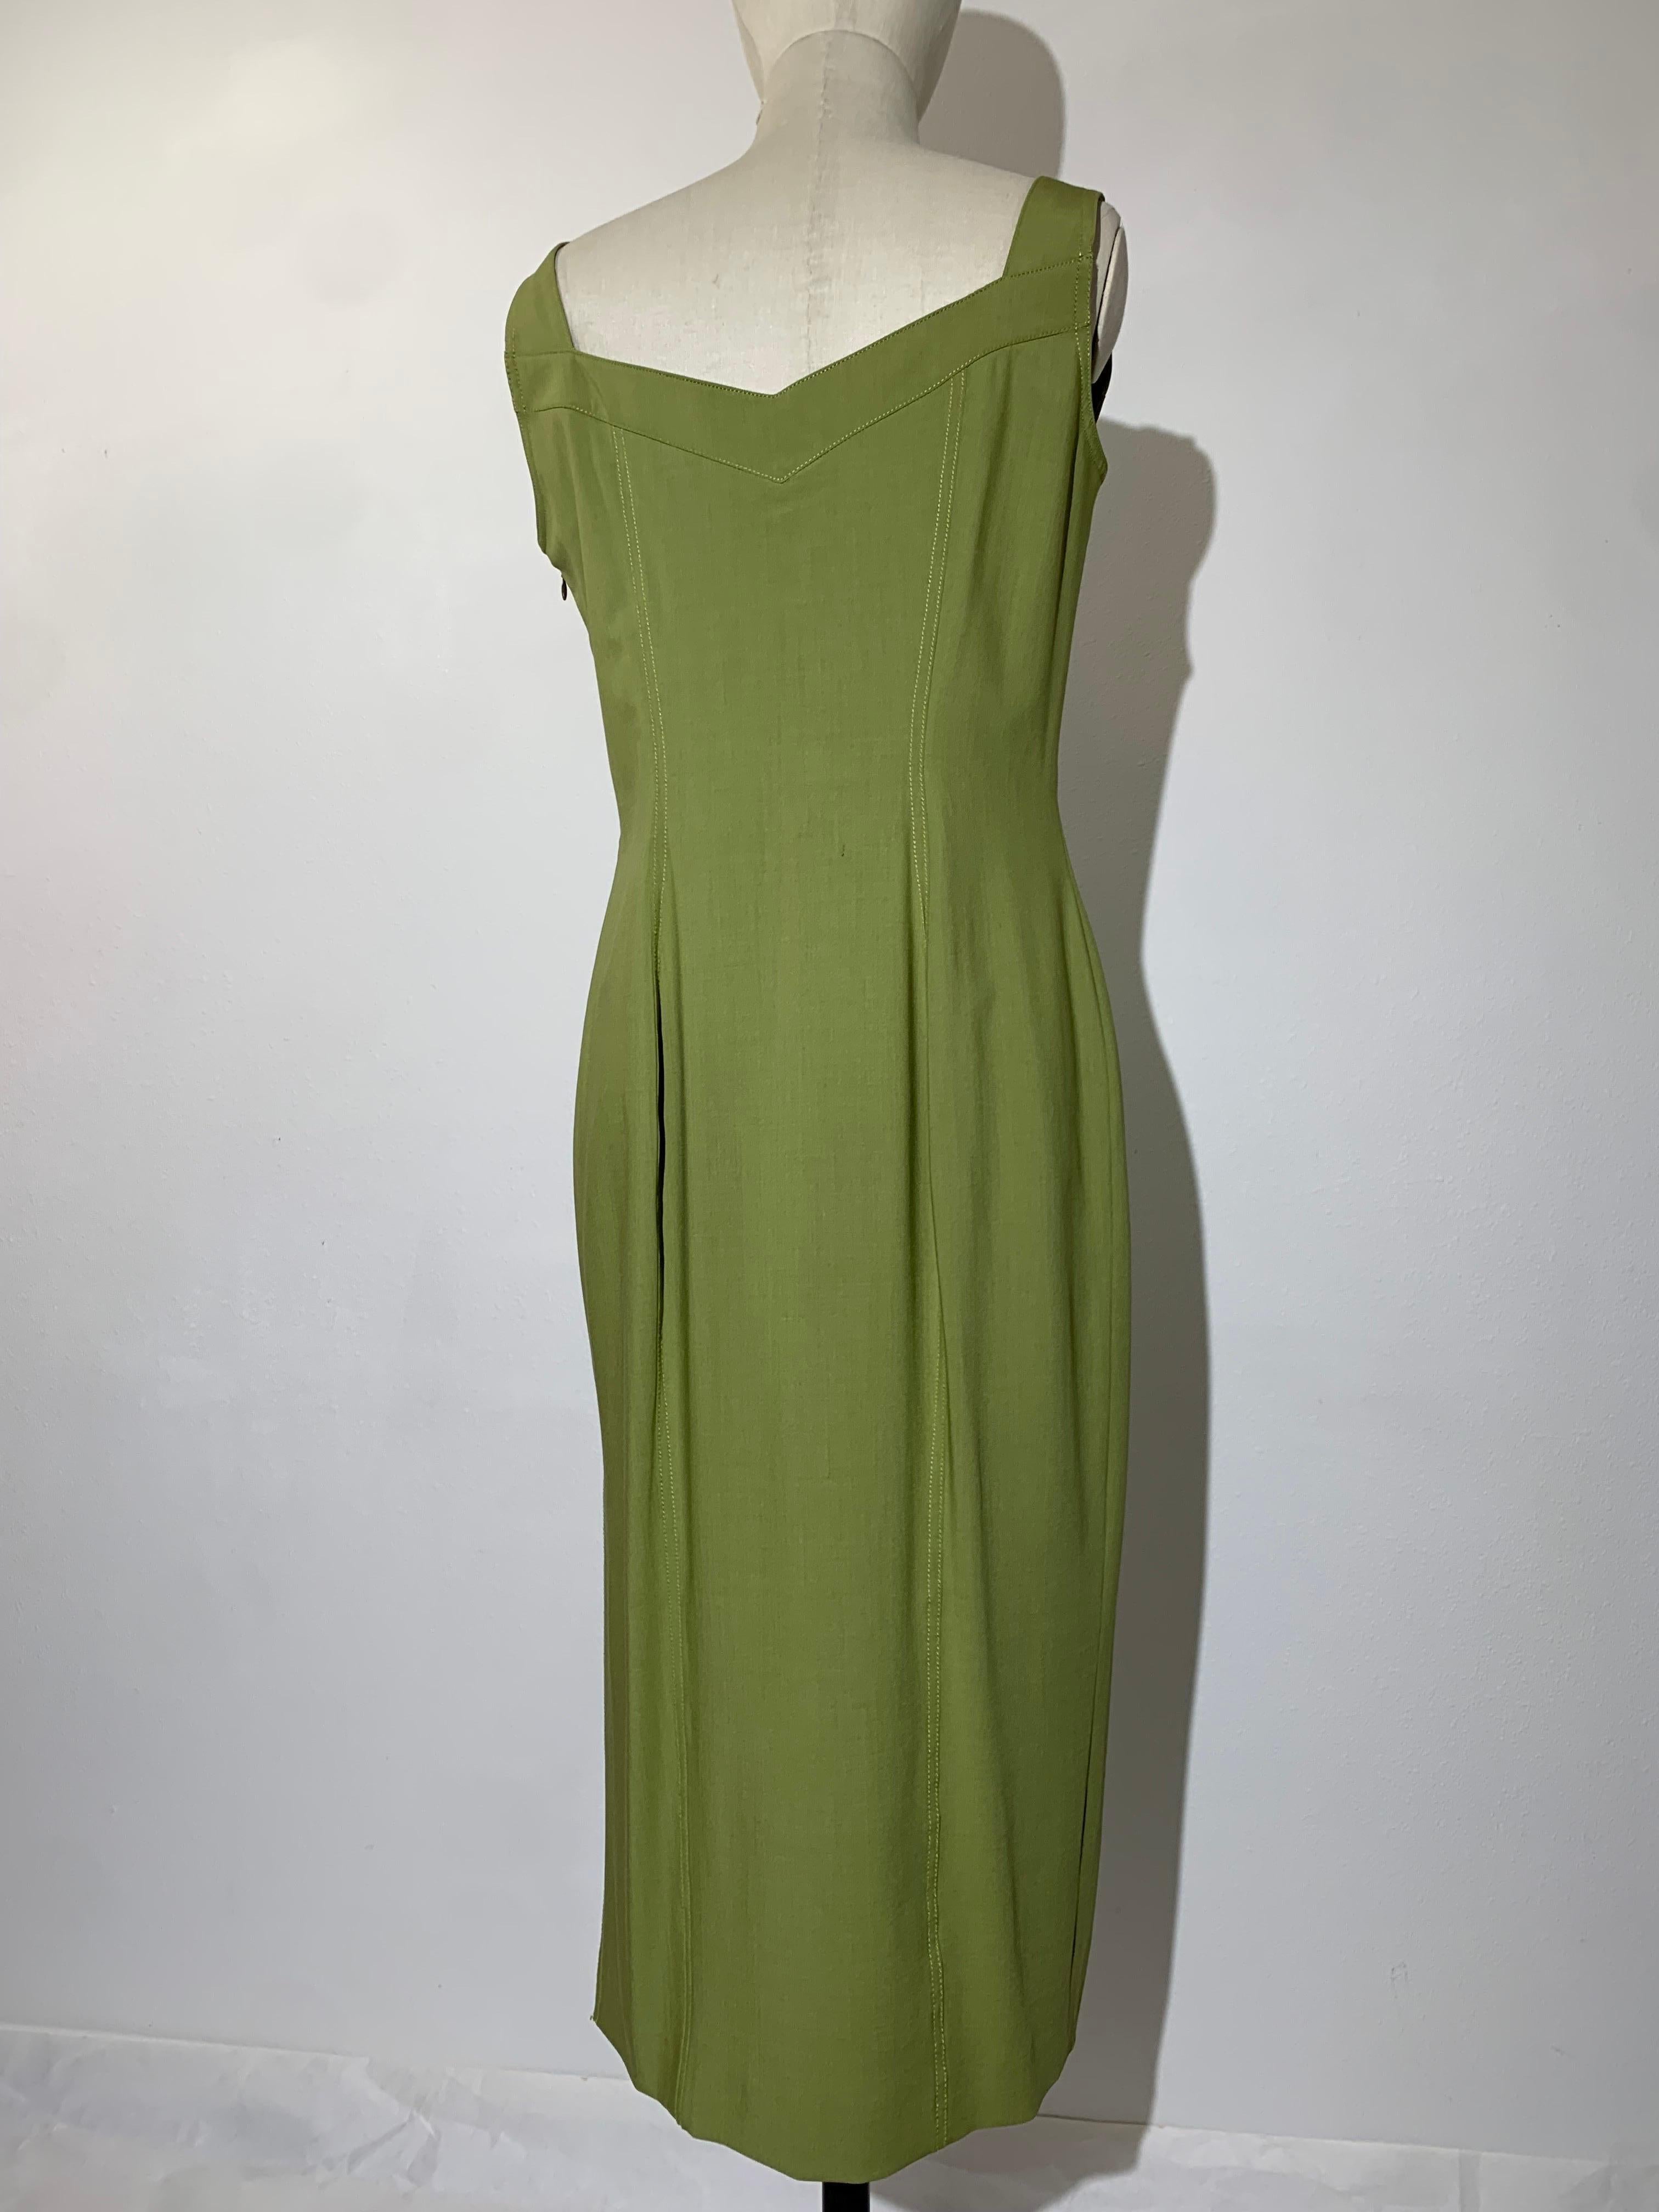 1990s John Galliano Sage Green Lightweight Wool Stretch Sheath Dress In Excellent Condition For Sale In Gresham, OR